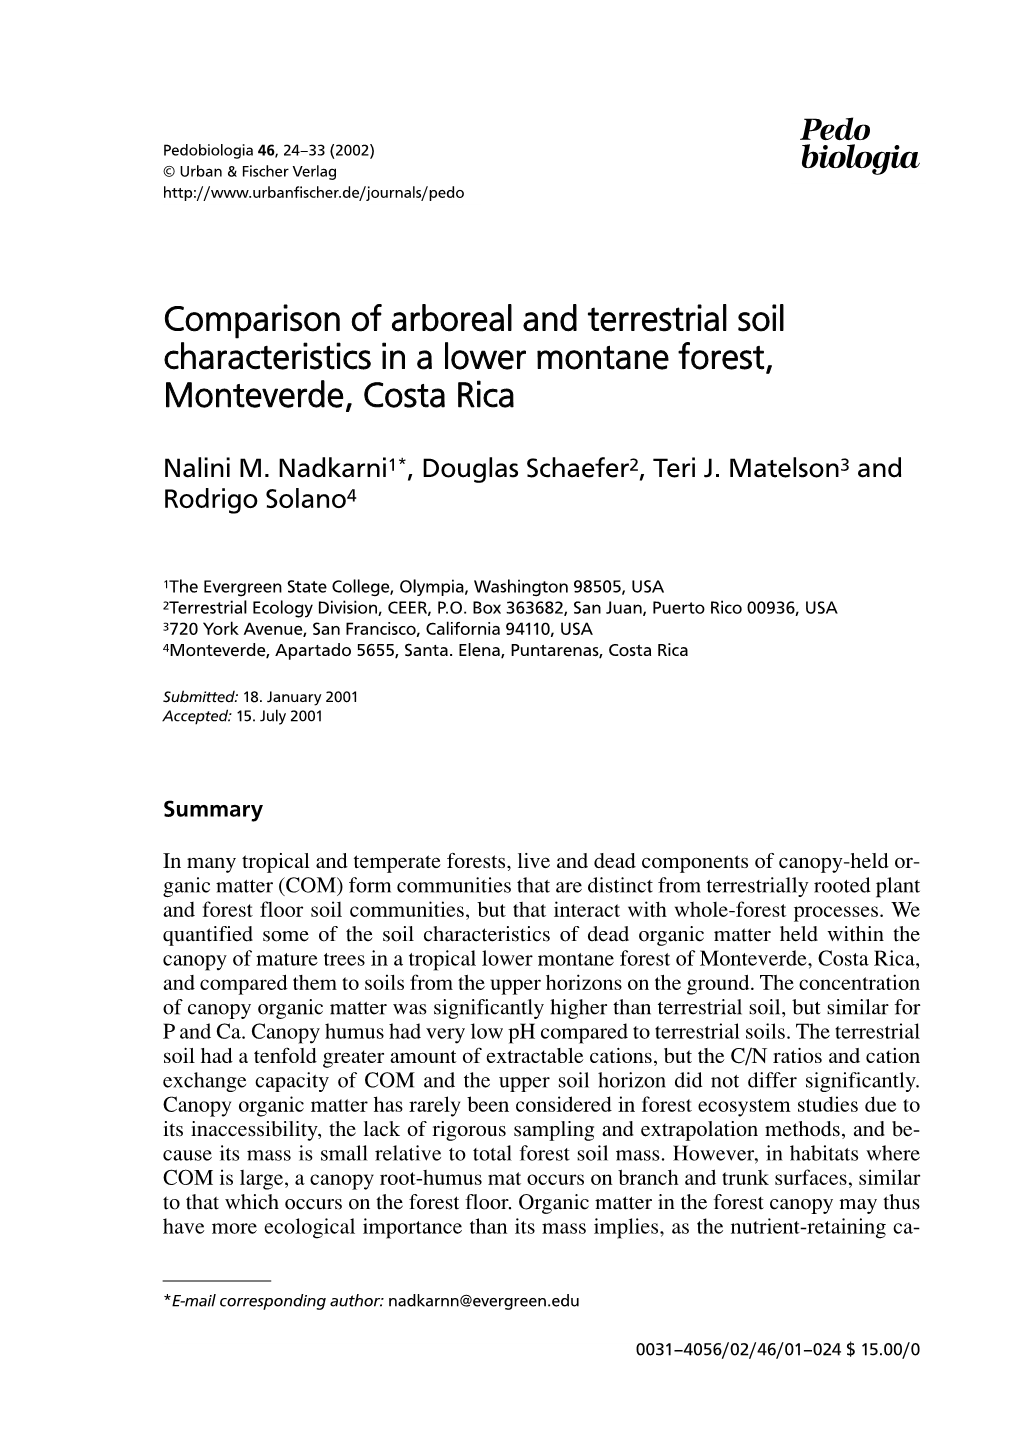 Comparison of Arboreal and Terrestrial Soil Characteristics in a Lower Montane Forest, Monteverde, Costa Rica